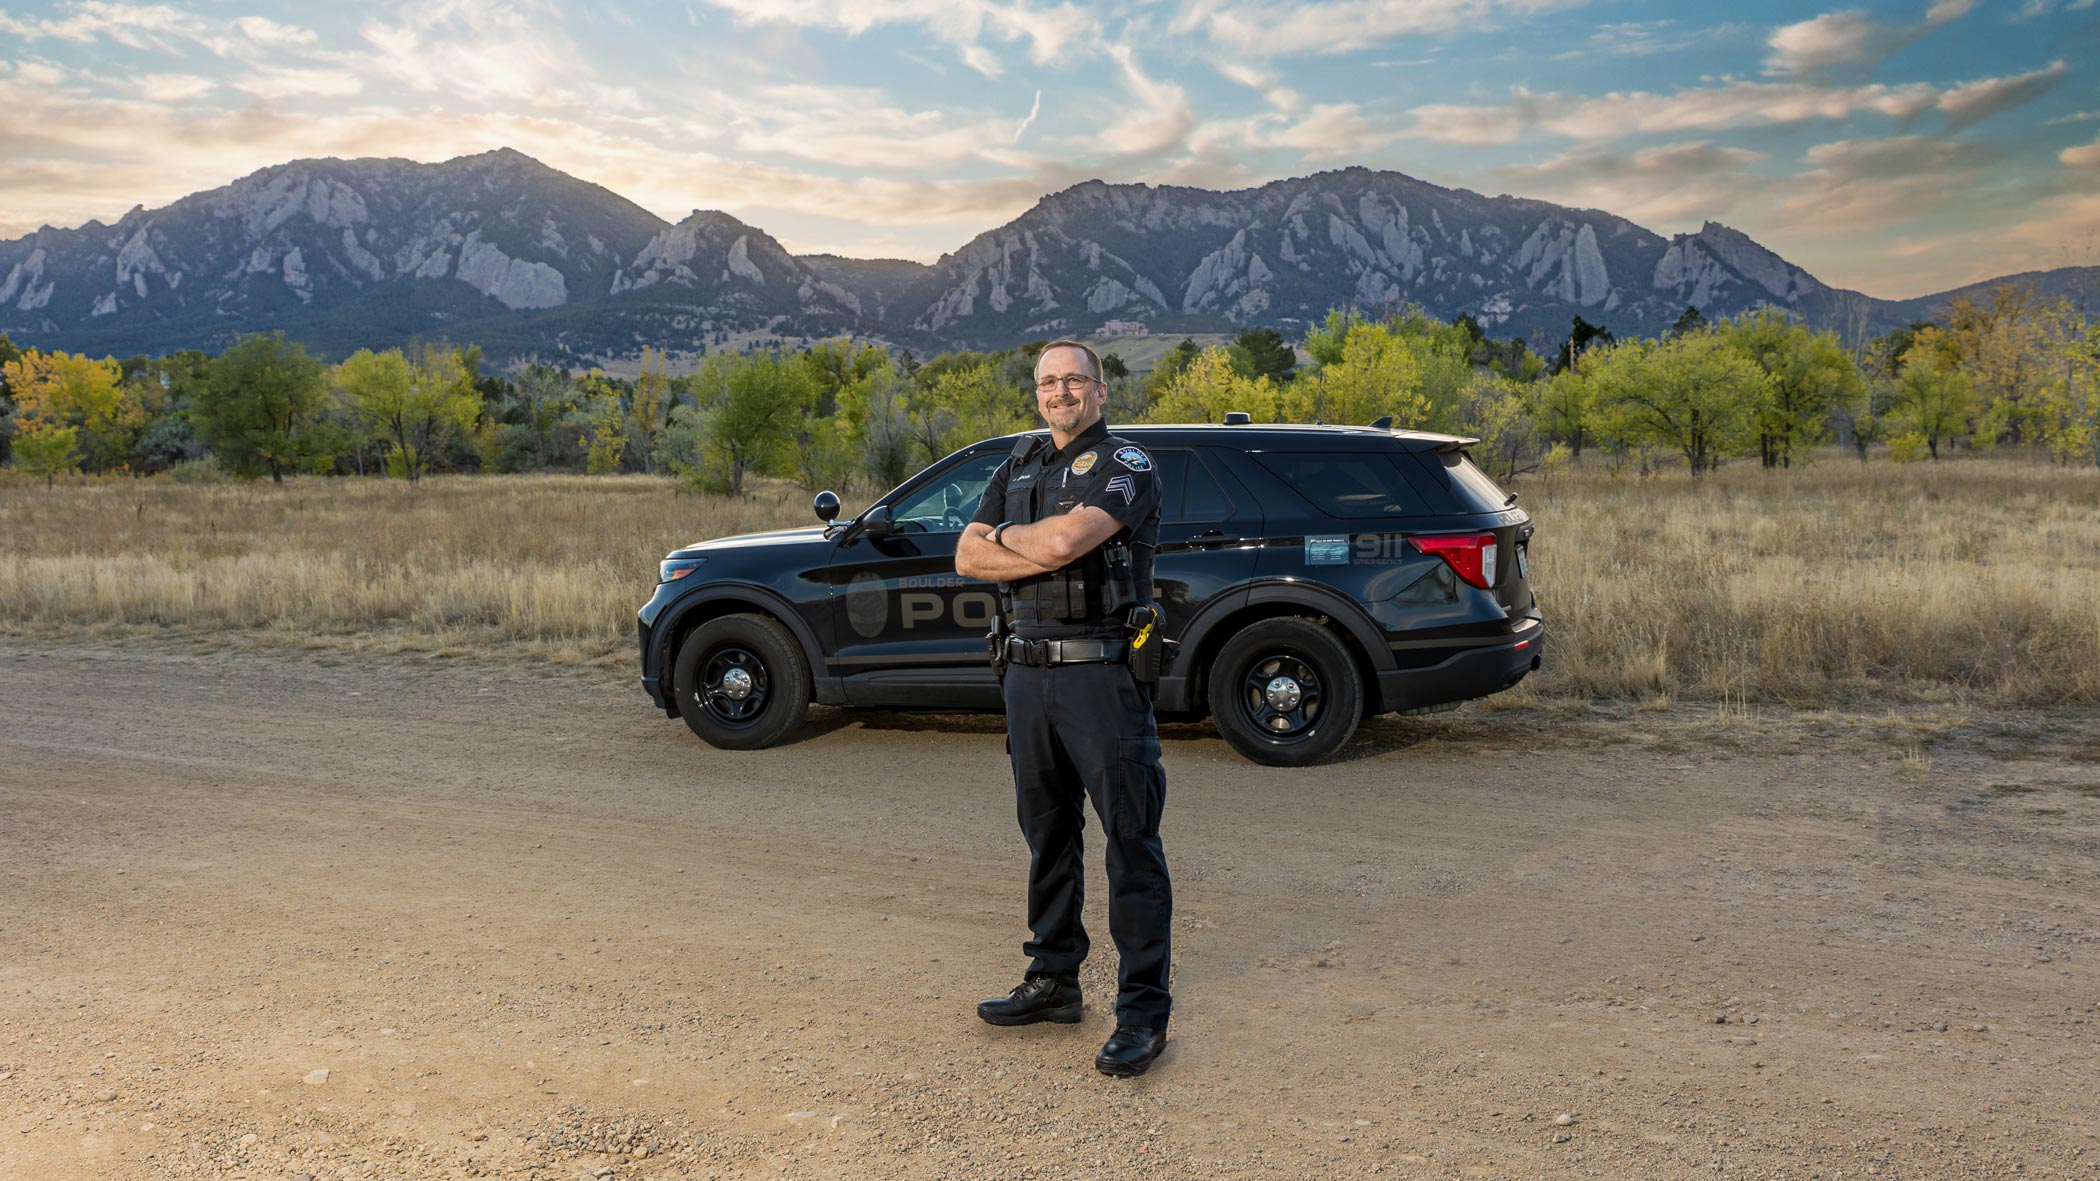 Boulder PD officer posing in front of vehicle with mountain backdrop.